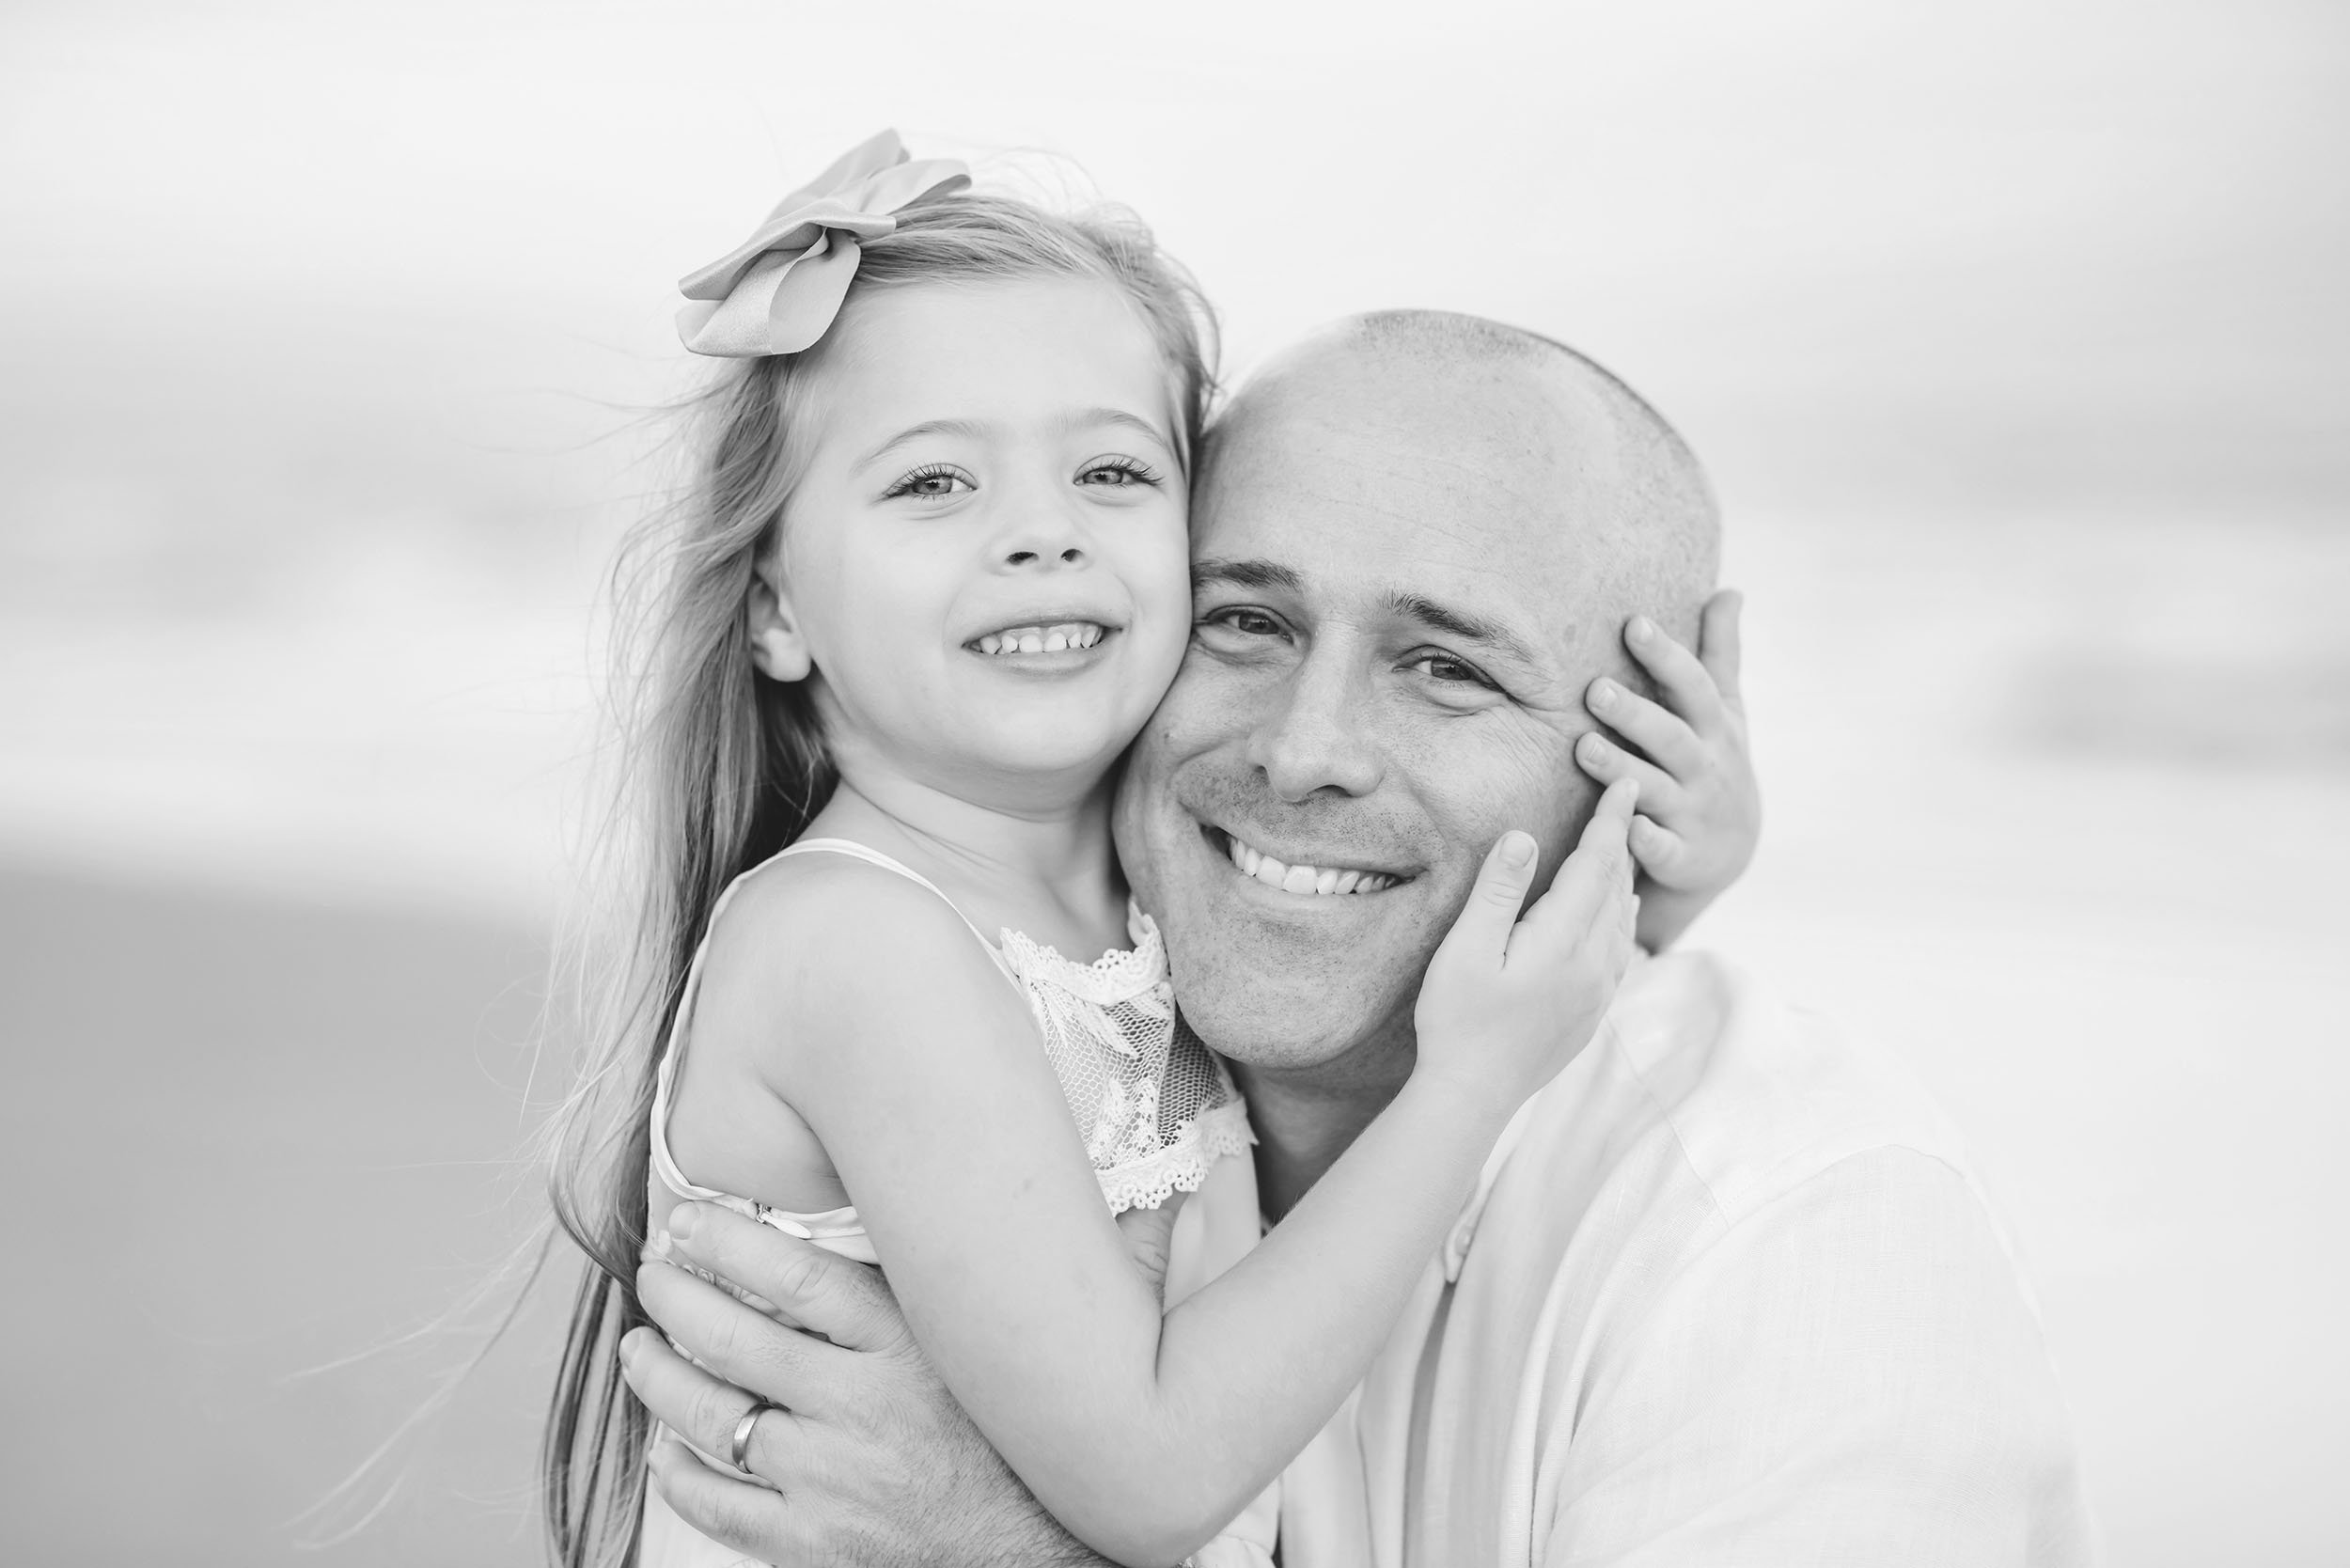 Daddy and Daughter Image